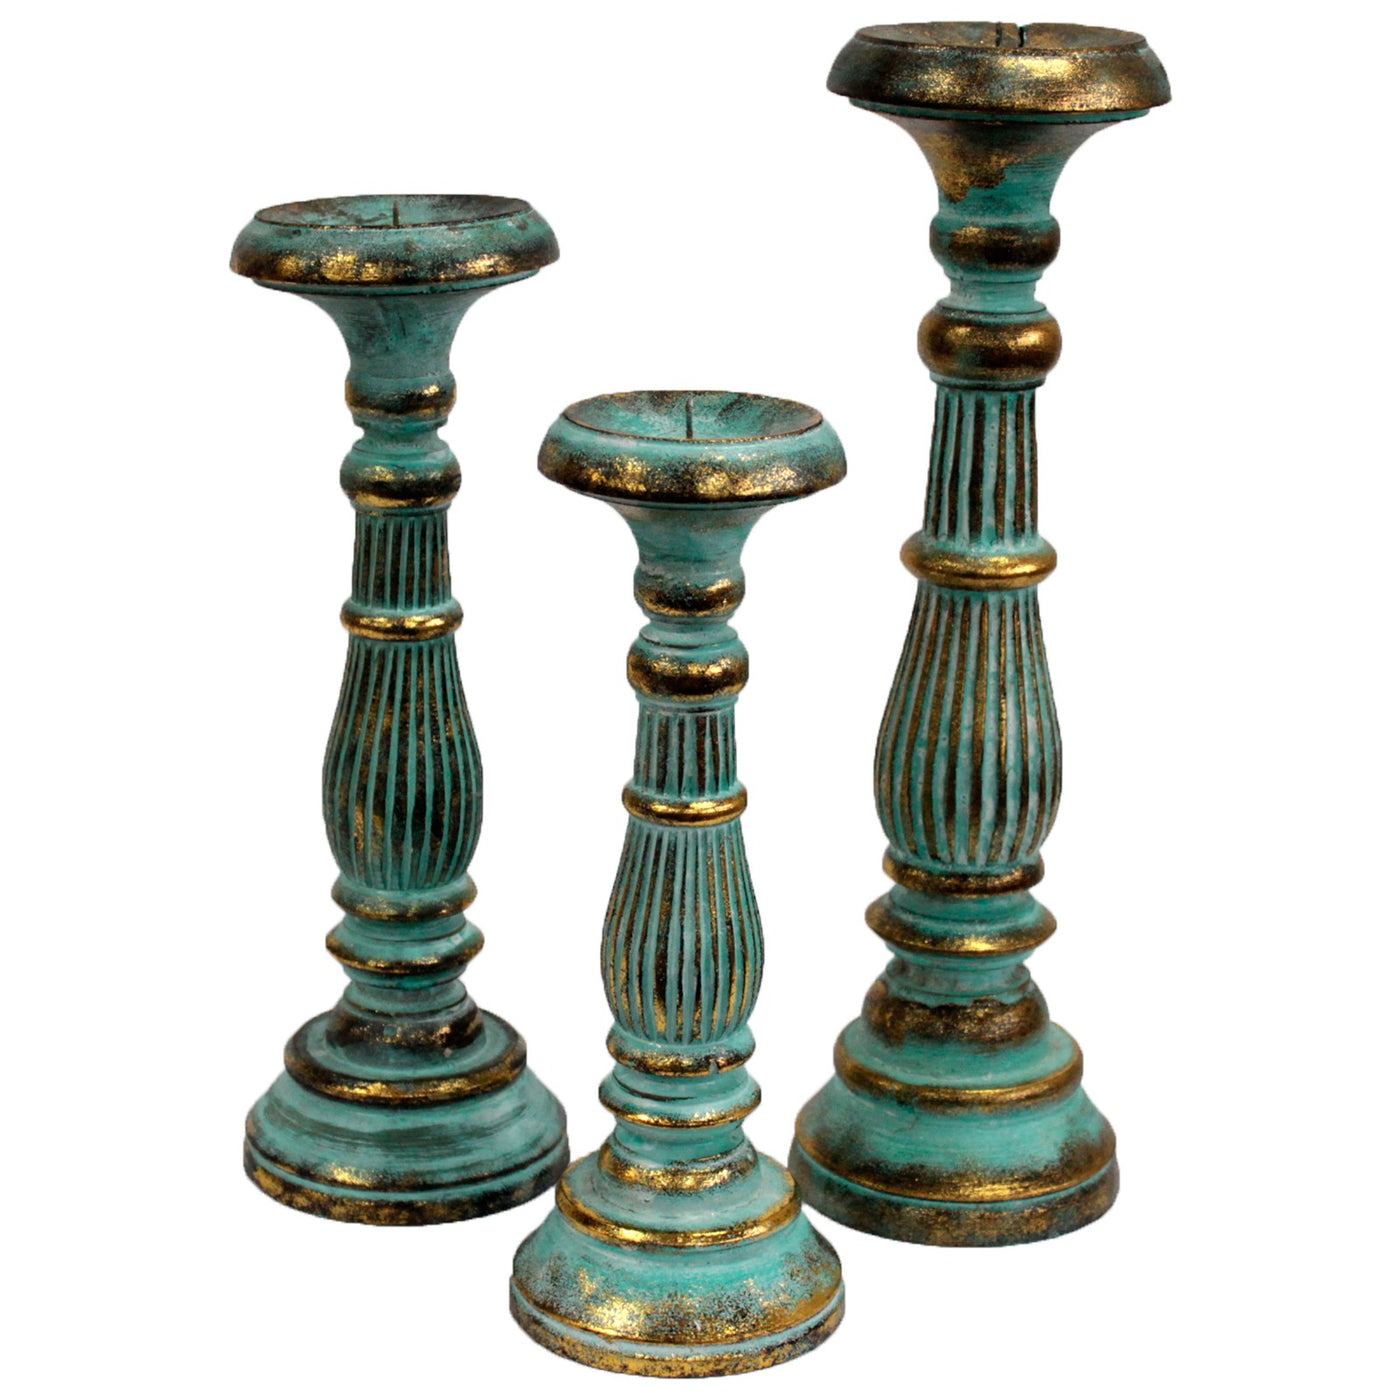 Large Wooden Vintage Rustic Green Gold Candle Holders.